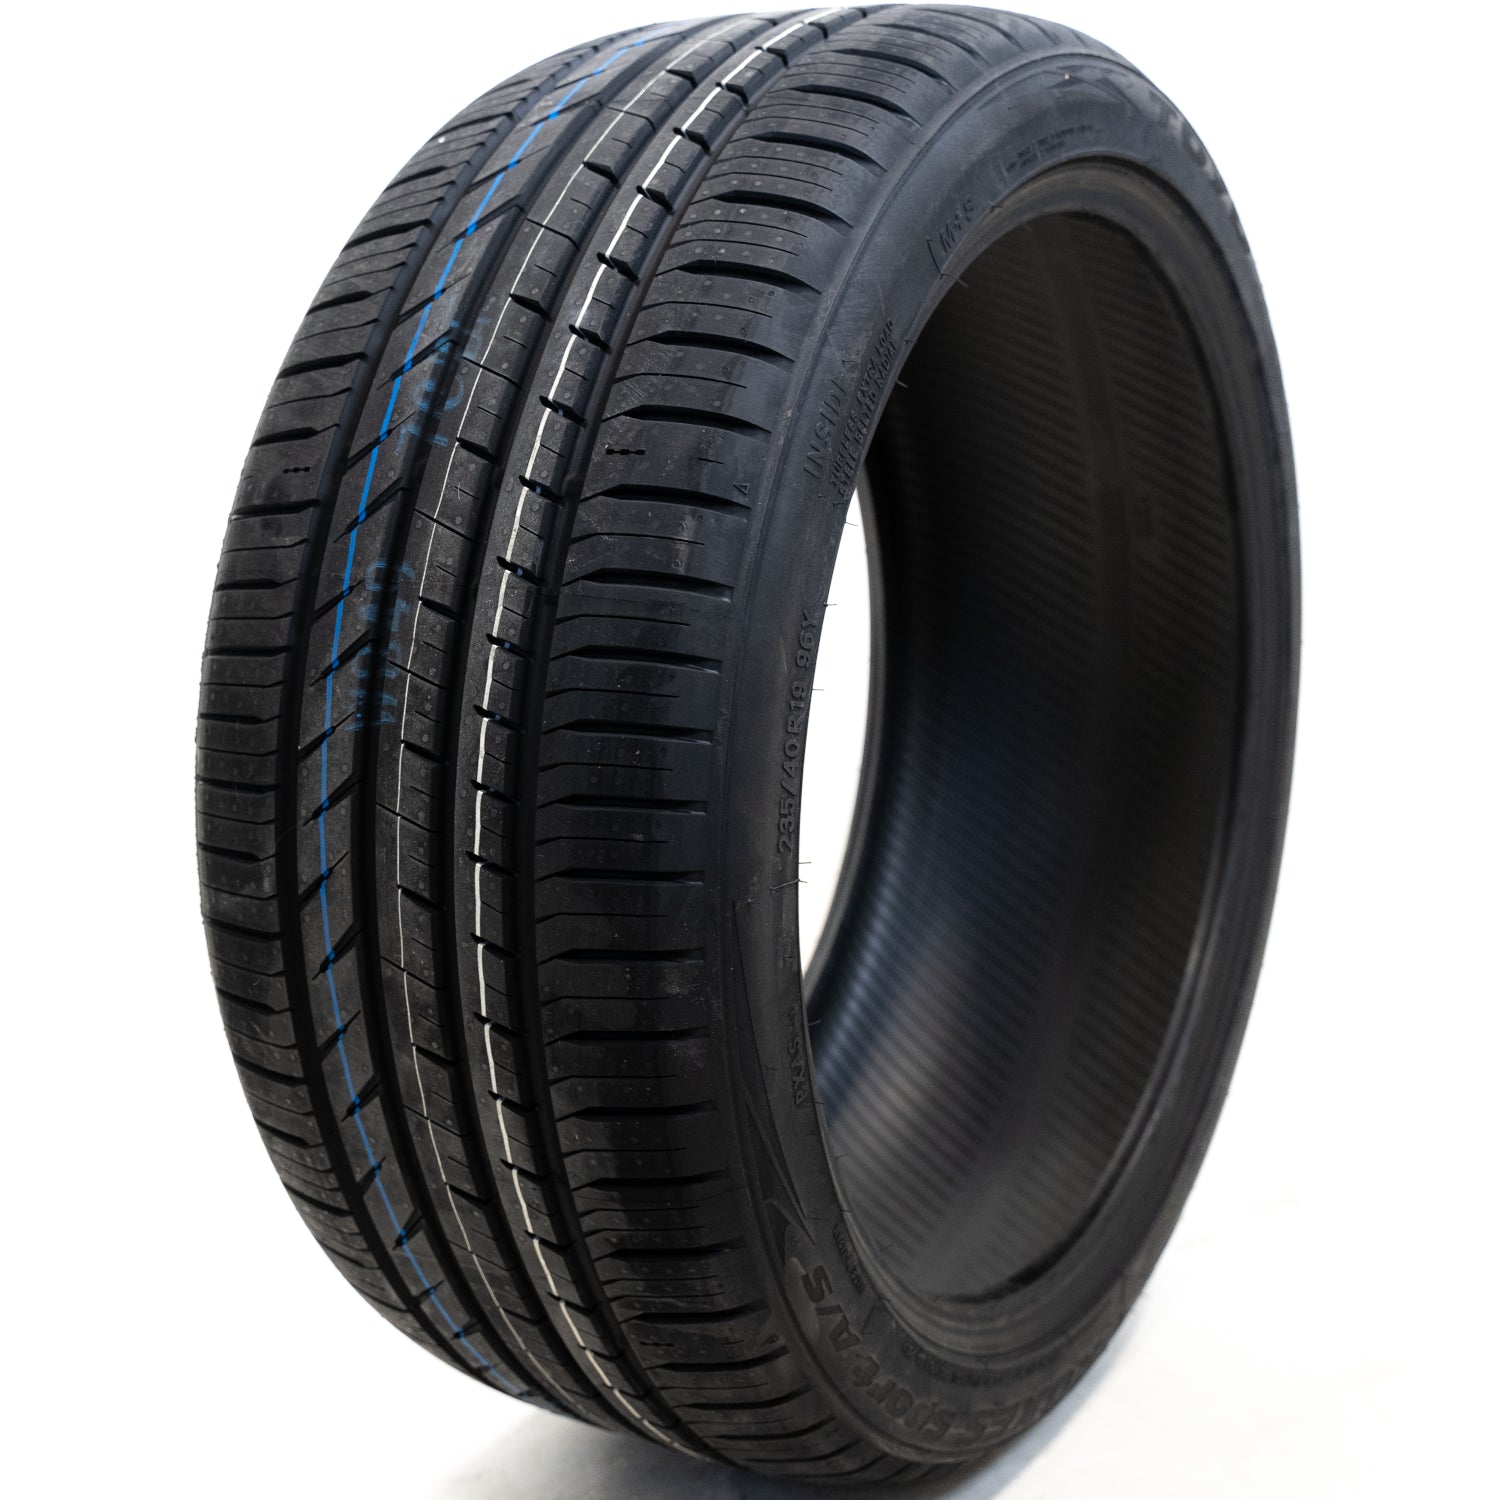 TOYO TIRES PROXES SPORT A/S 205/50R17XL (25.1X8.1R 17) Tires